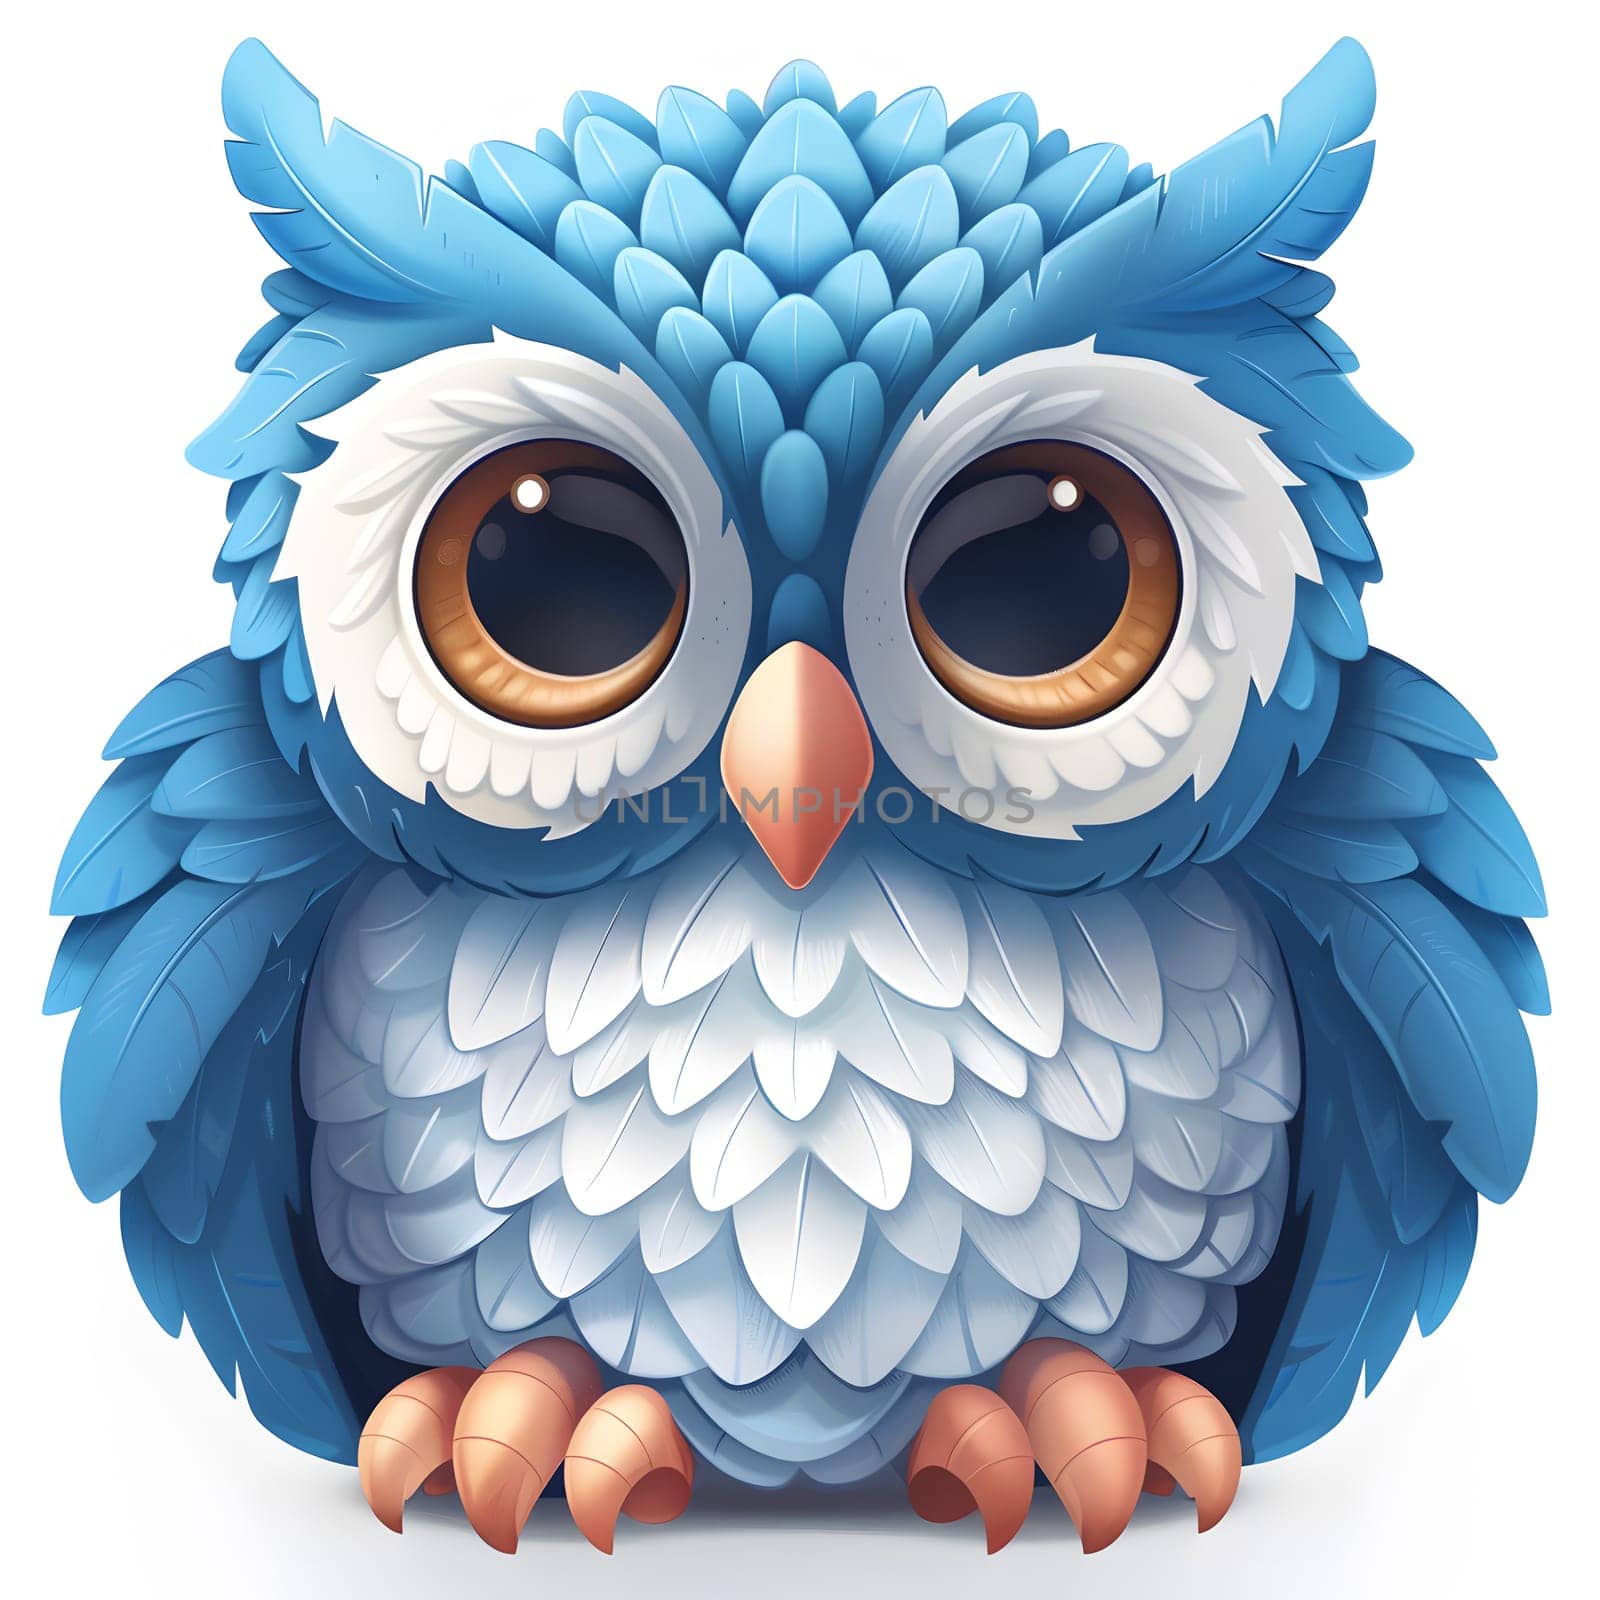 Head of blue owl with big eyes on white background by Nadtochiy